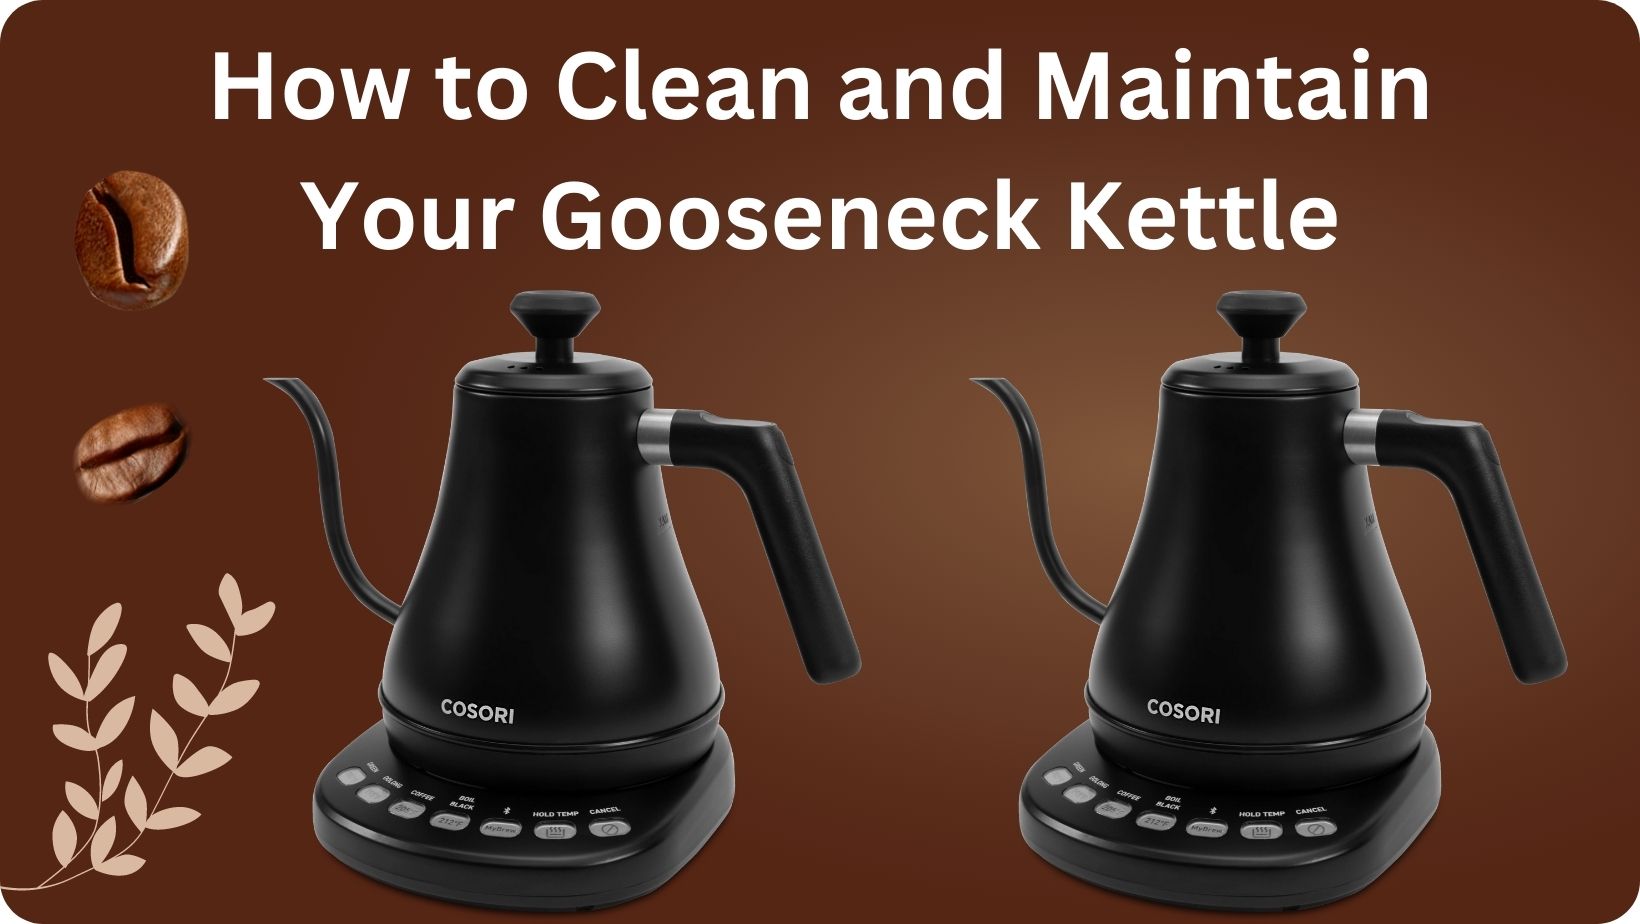 How to Clean and Maintain Your Gooseneck Kettle